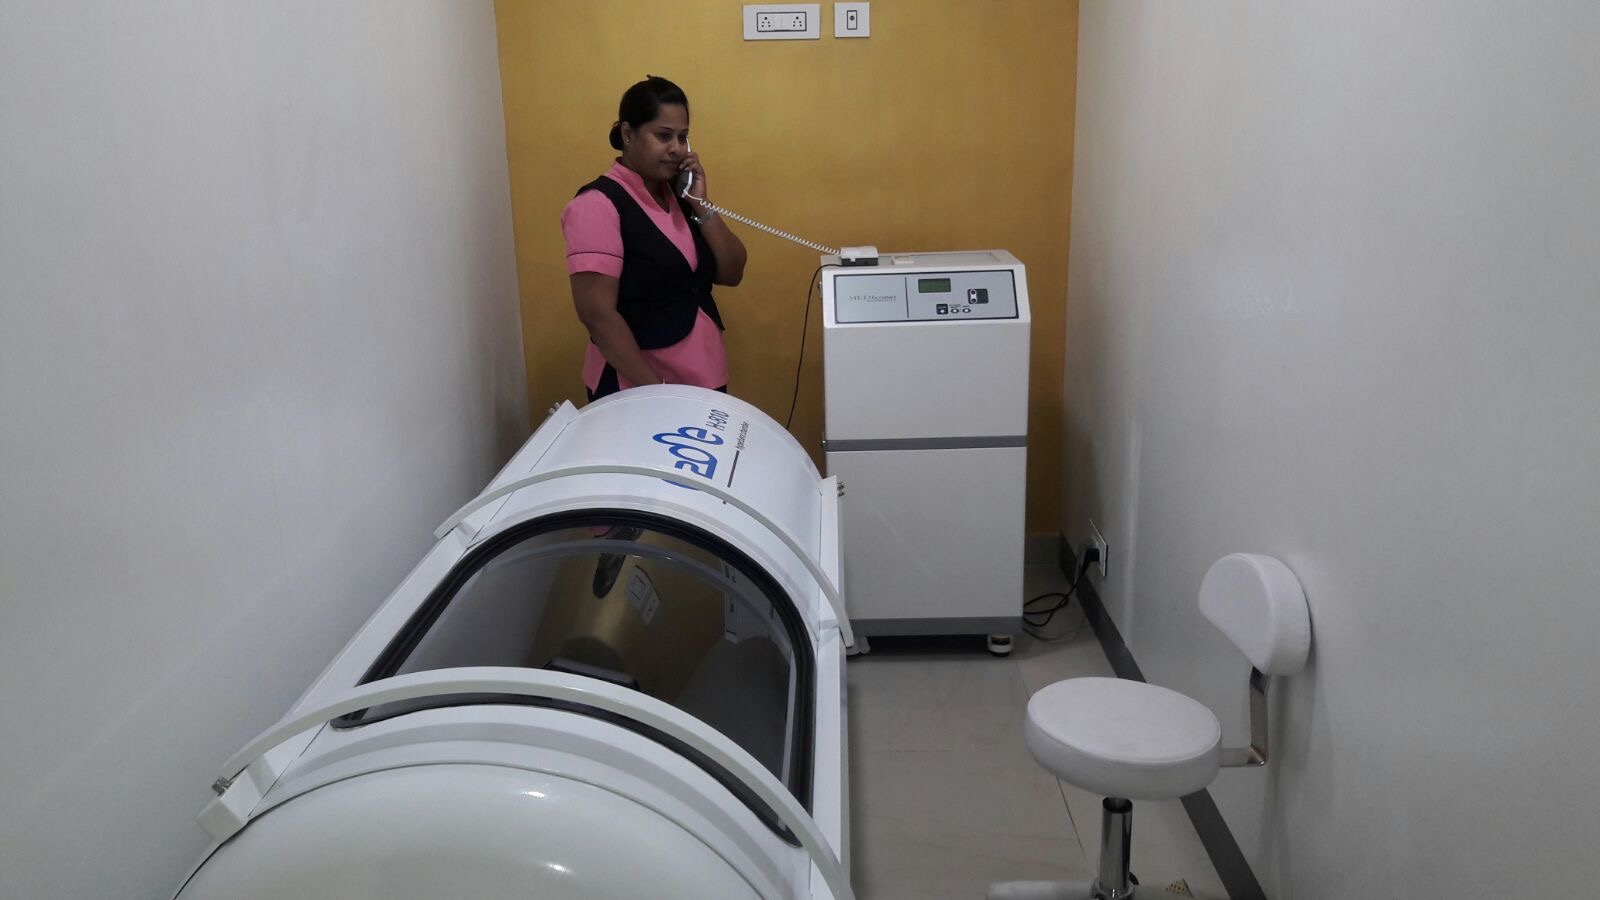 India Hyperbaric oxygen therapy chamber, 1.5 ATA in Skin & Anti Aging Clinic.